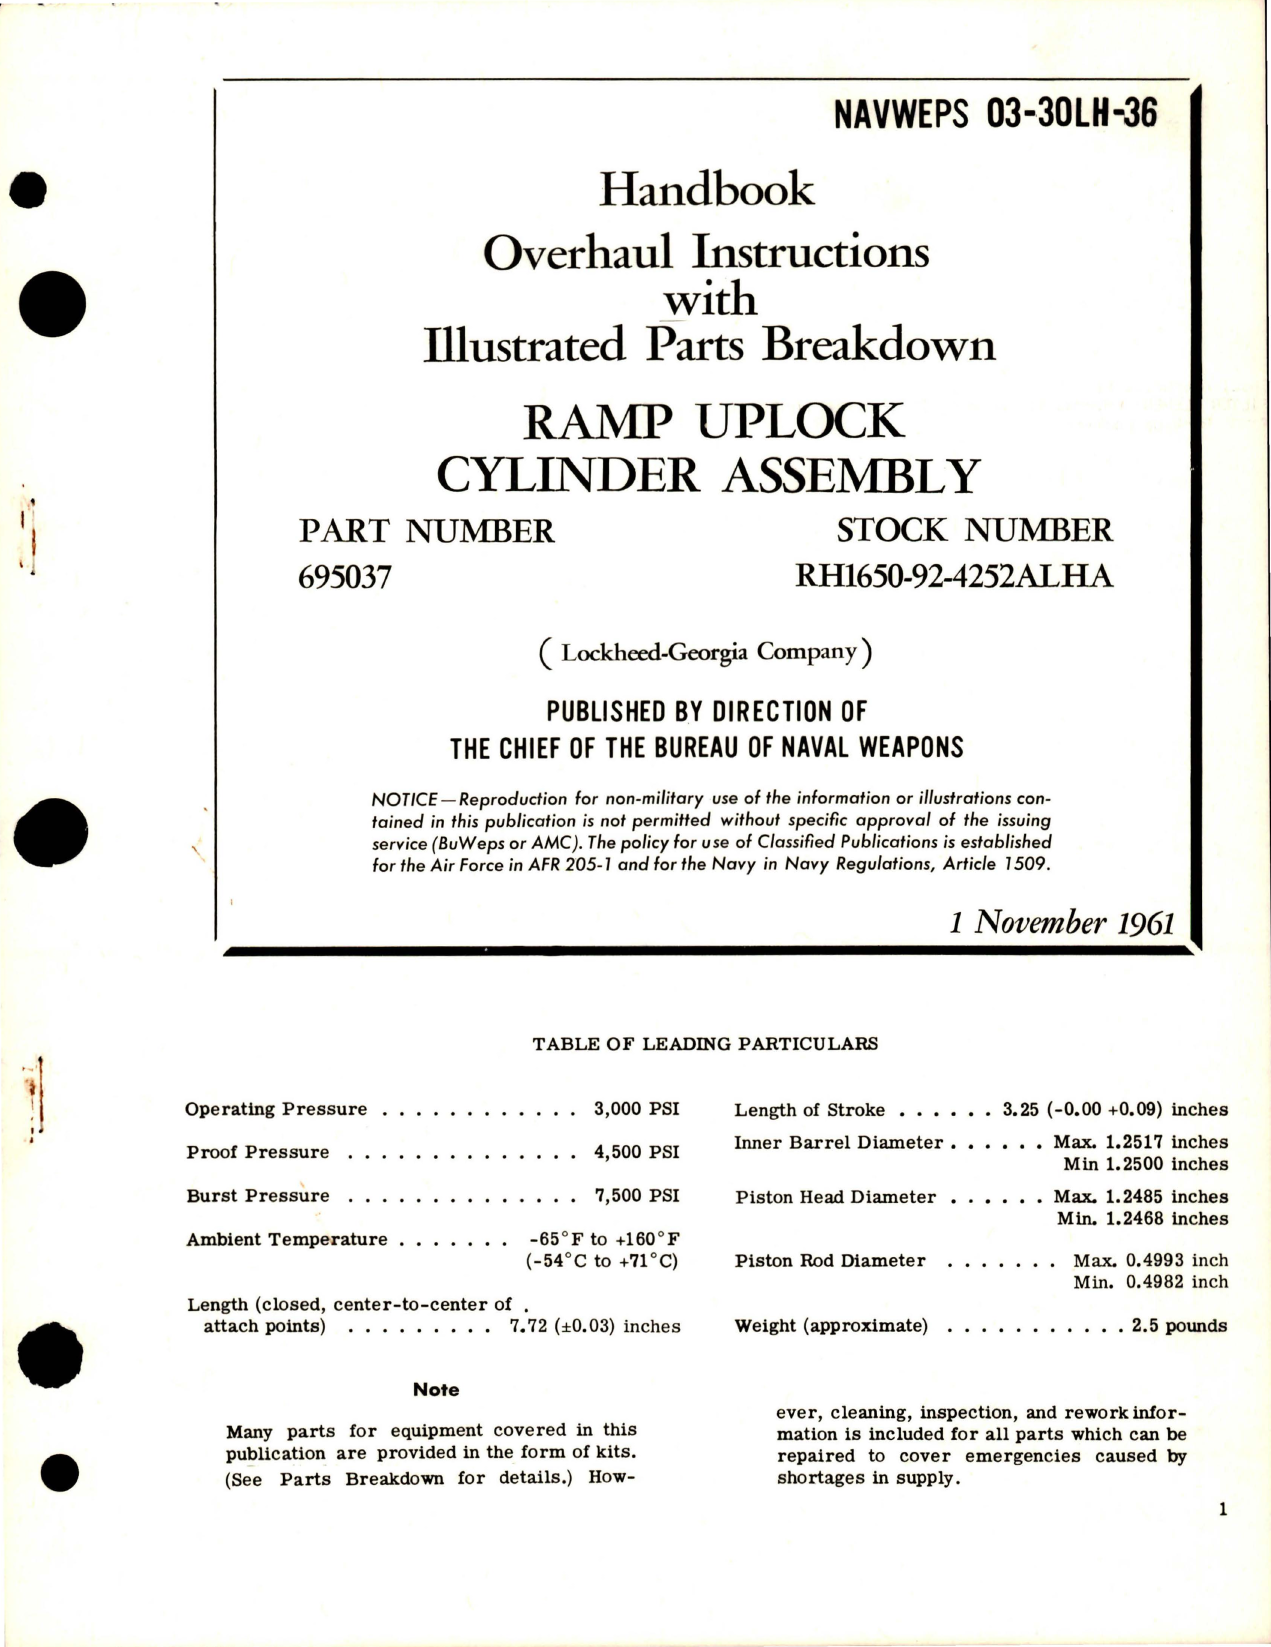 Sample page 1 from AirCorps Library document: Overhaul Instructions with Parts Breakdown for Ramp Uplock Cylinder Assembly - Part 695037 